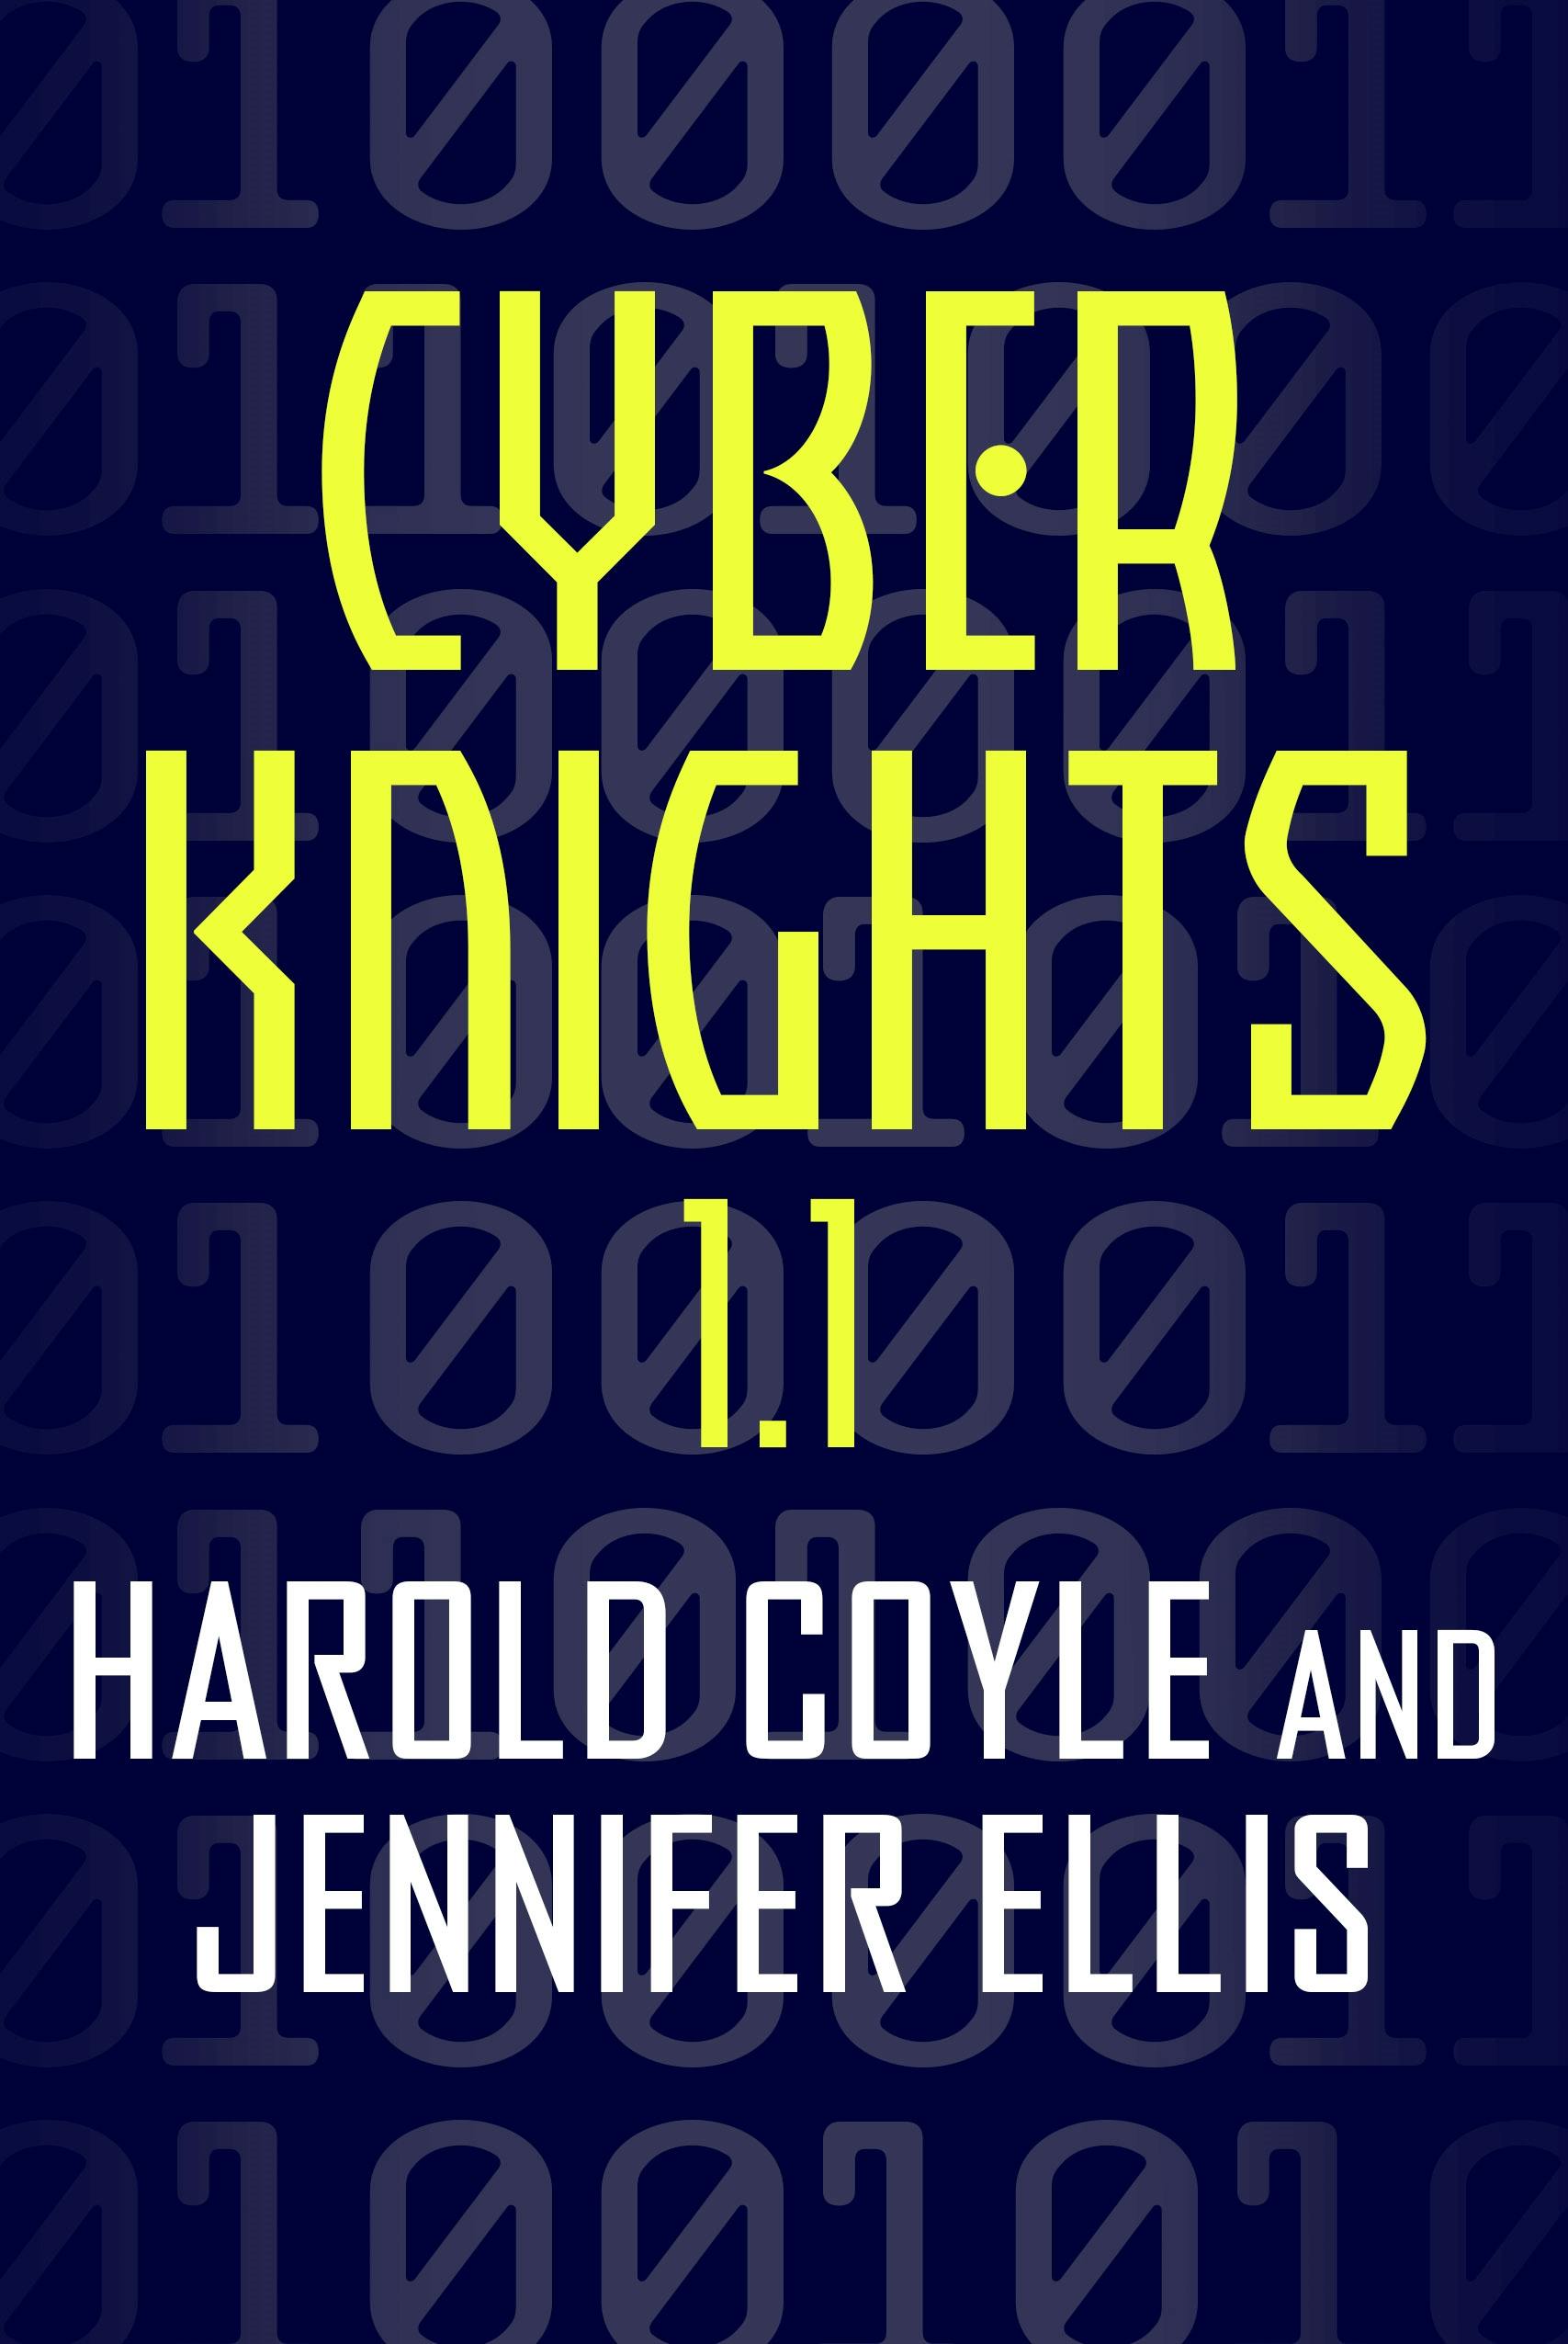 Cover for the book titled as: Cyber Knights 1.1